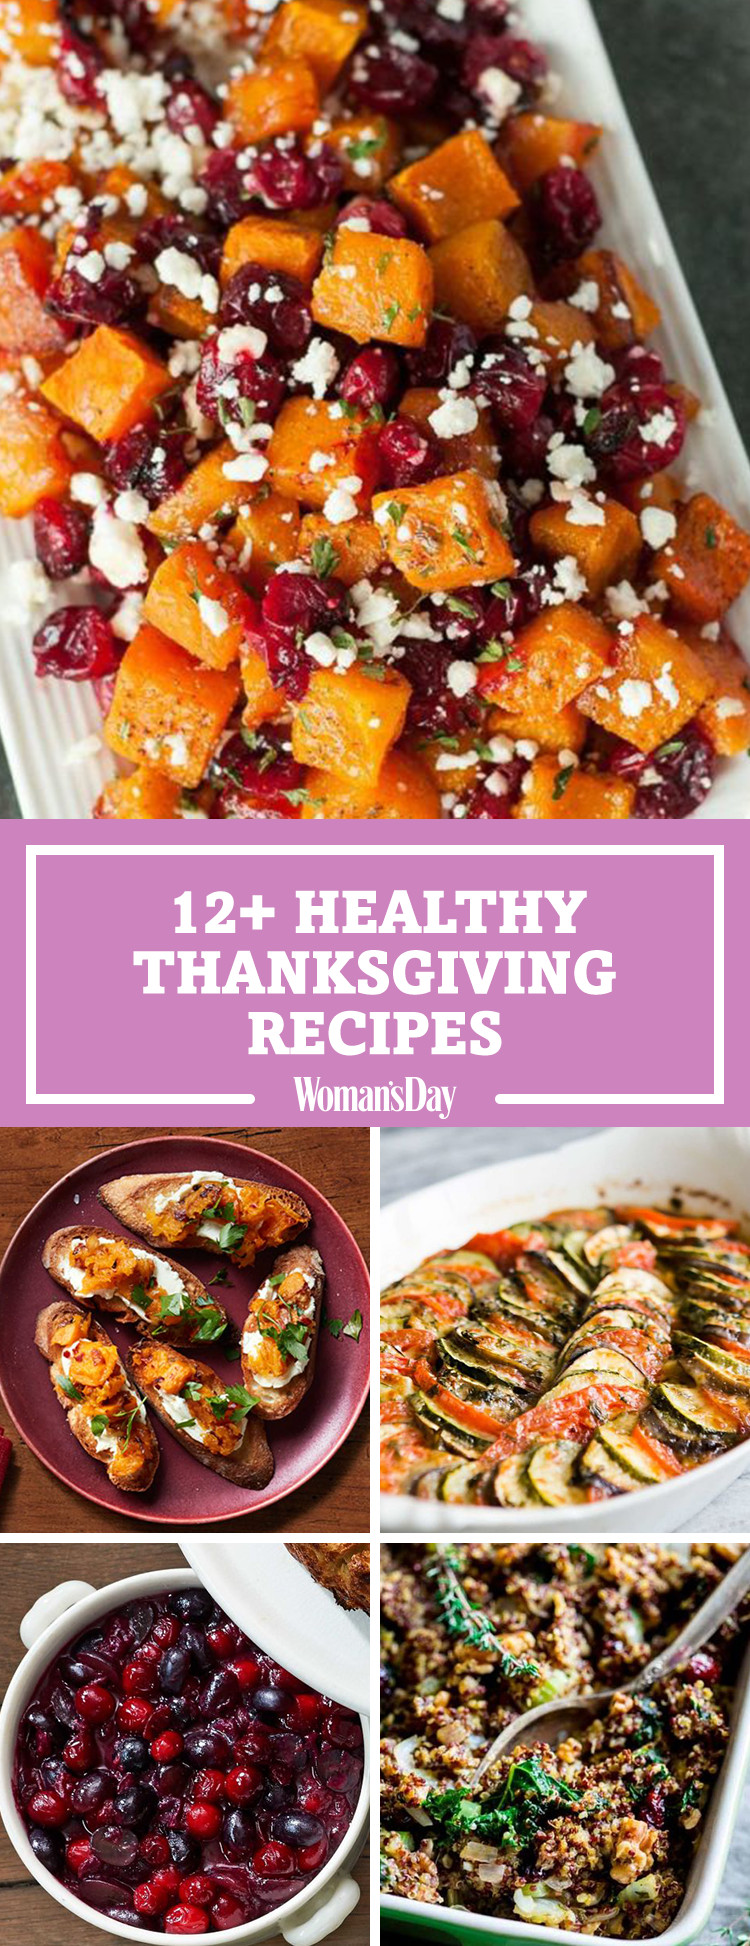 Healthy Side Dishes For Dinner
 16 Healthy Thanksgiving Dinner Recipes Healthier Sides